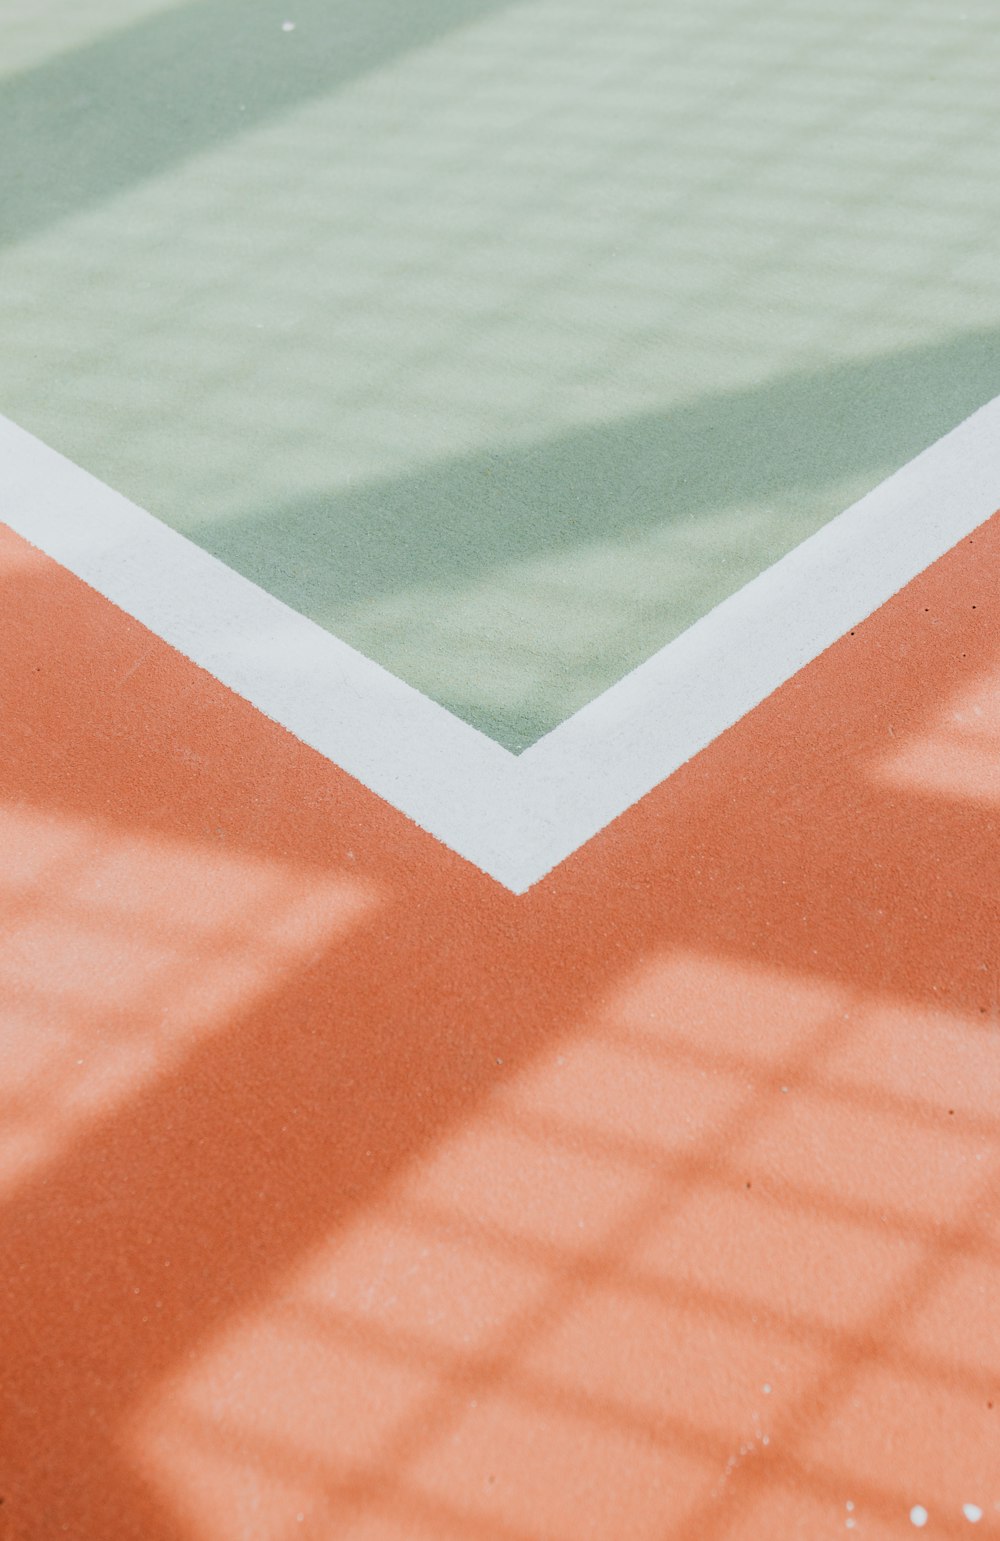 the shadow of a tennis player on a tennis court